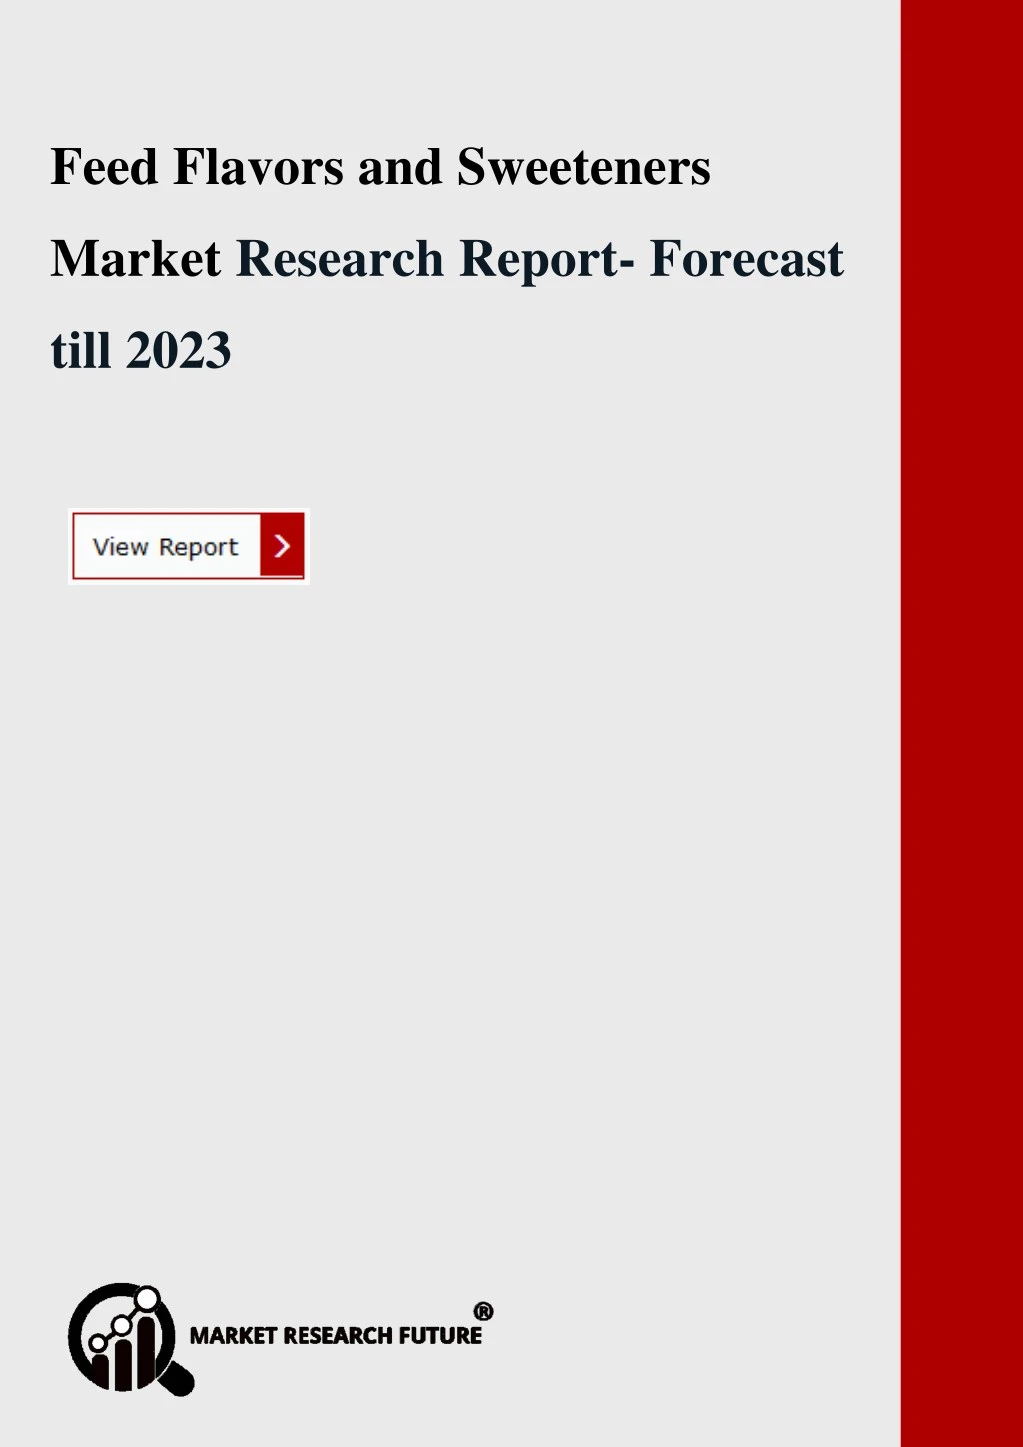 research report forecast till 2023